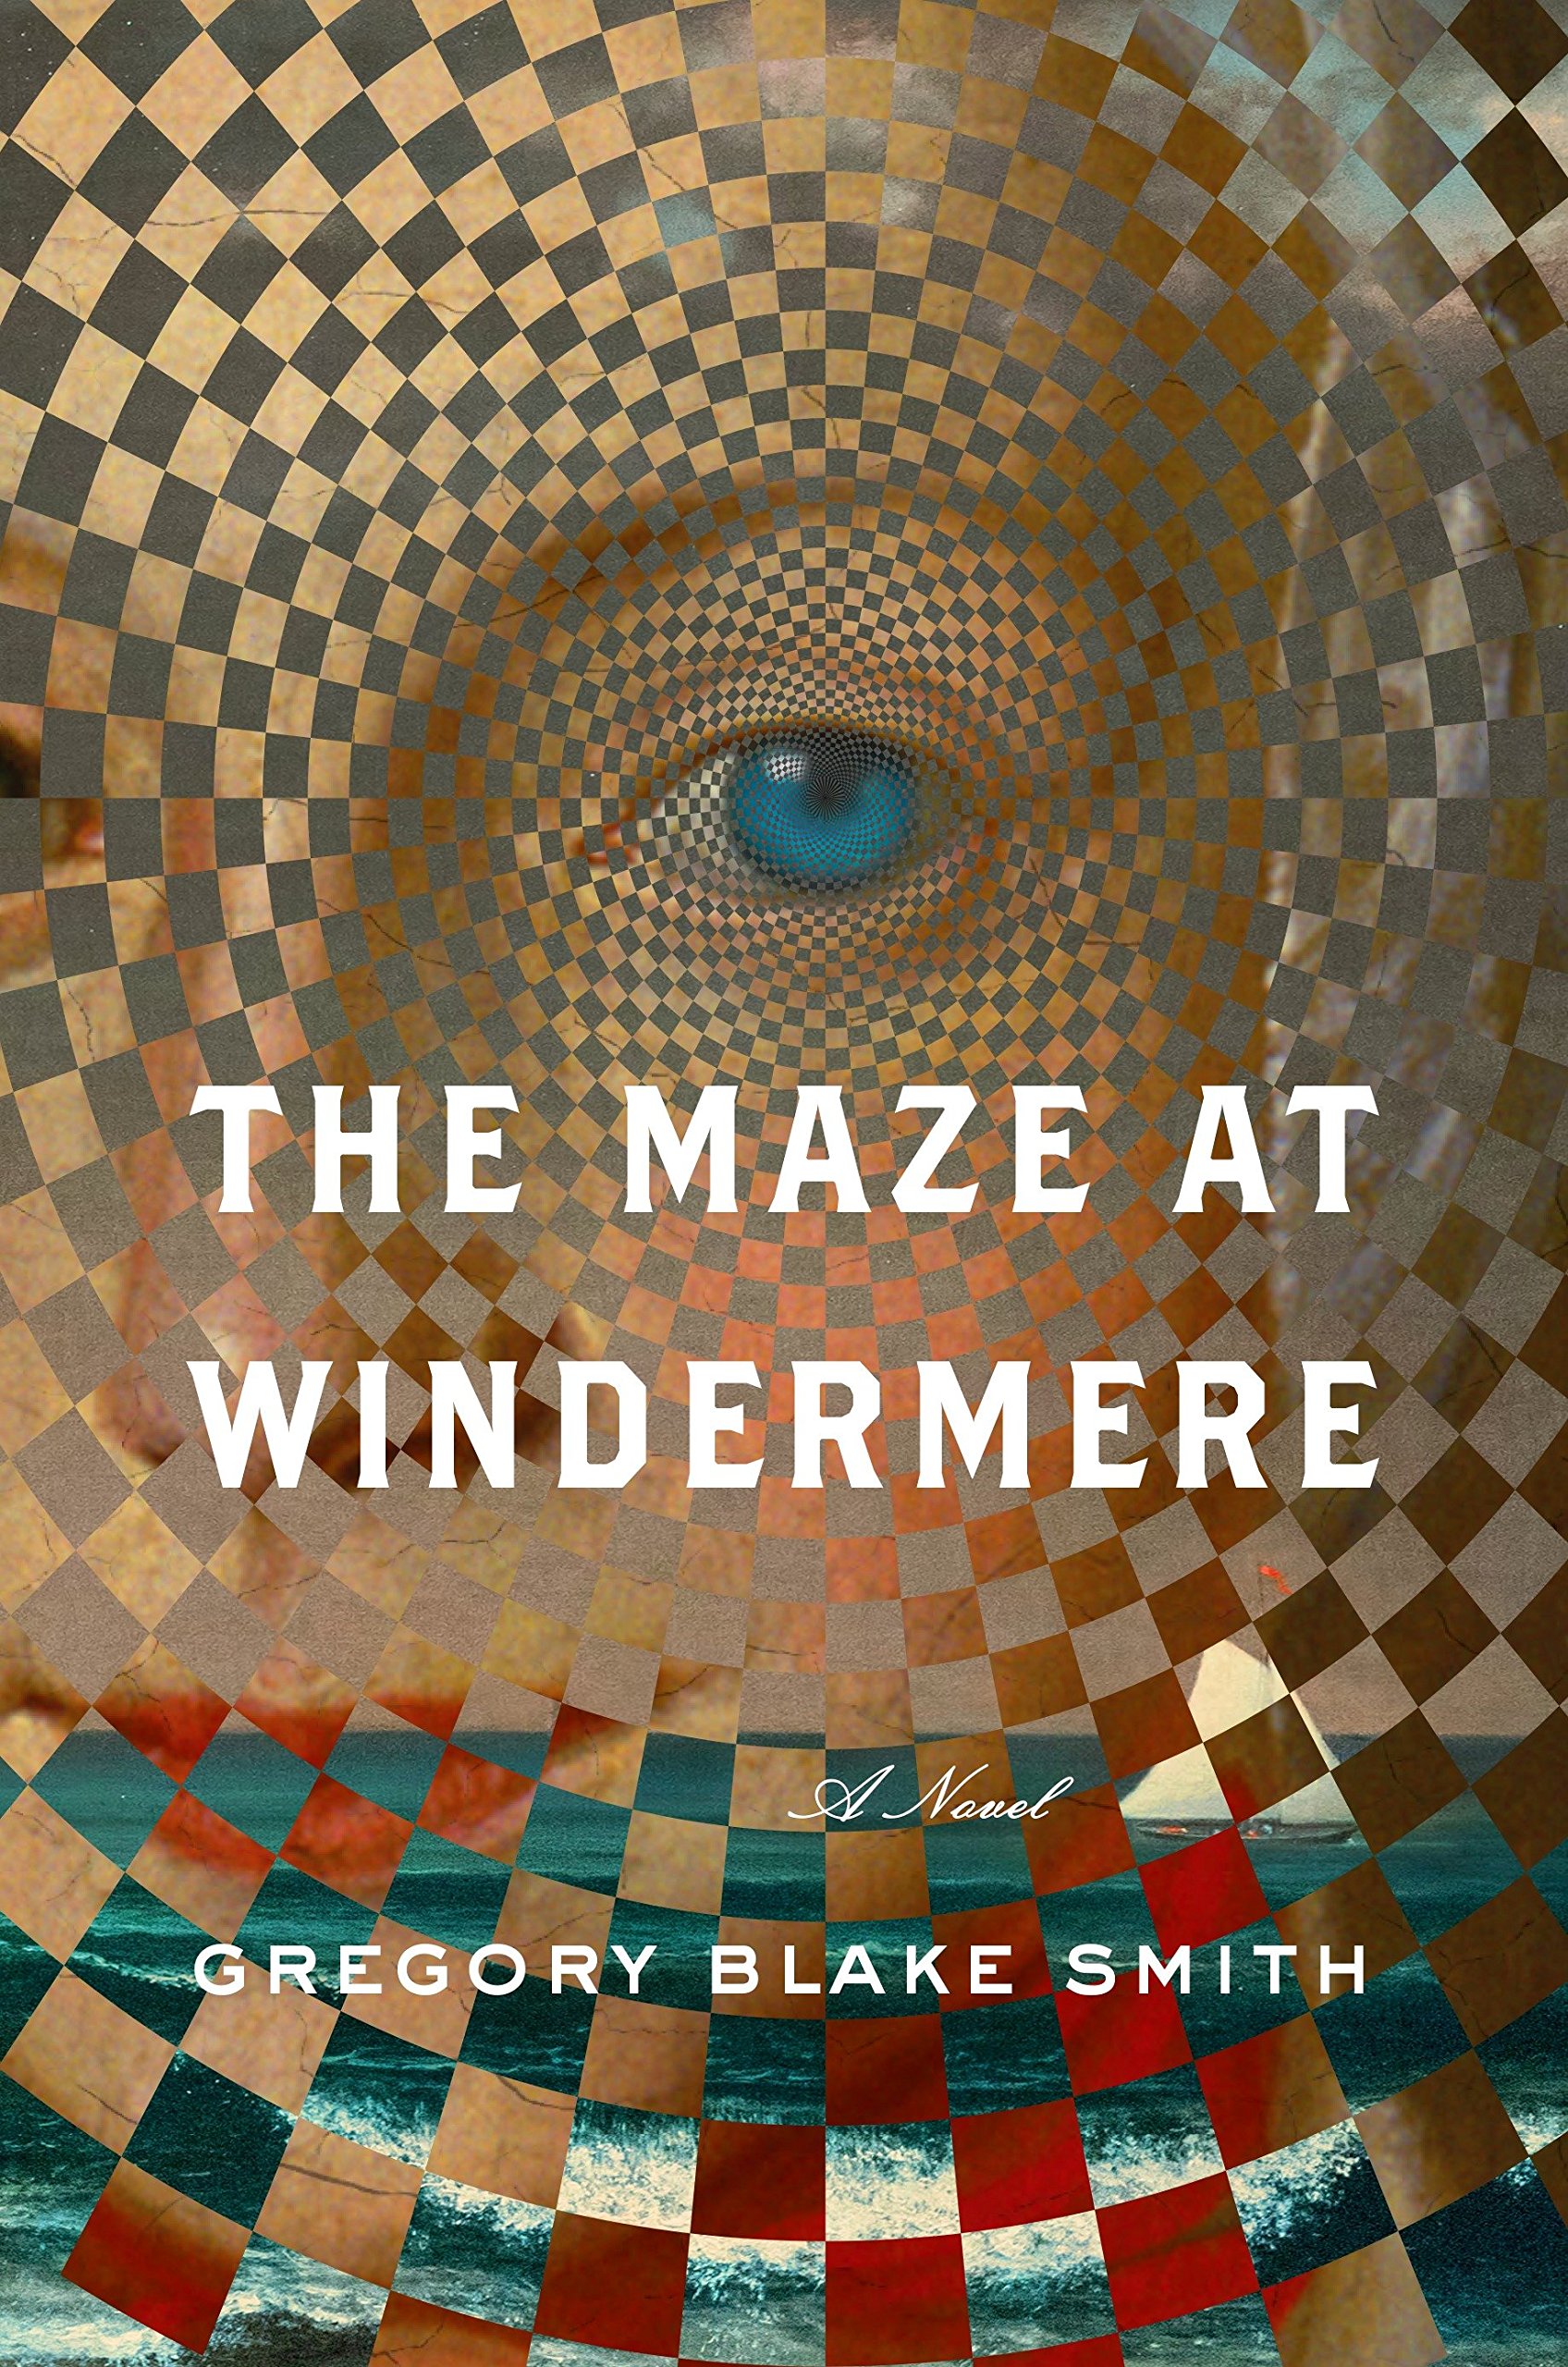 View description for 'The Maze at Windermere'